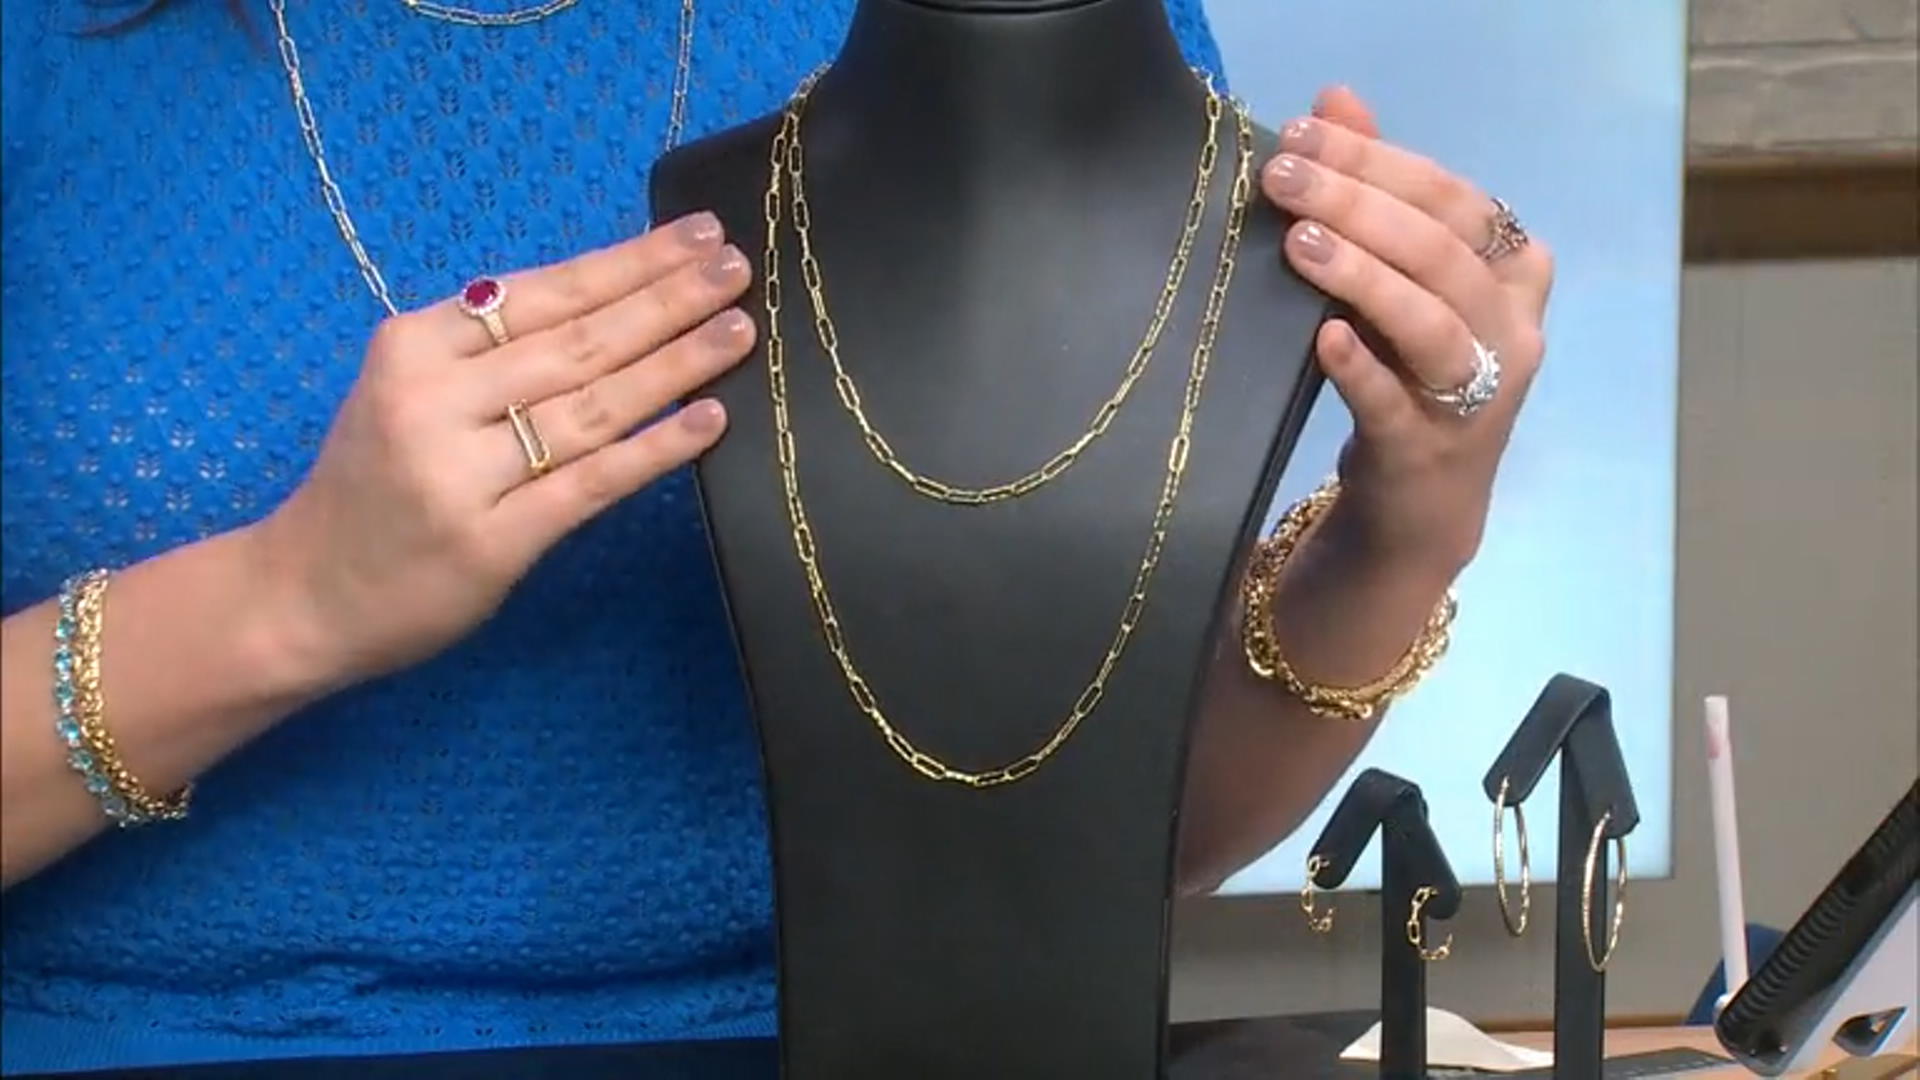 10K Yellow Gold Textured Paperclip Chain Video Thumbnail